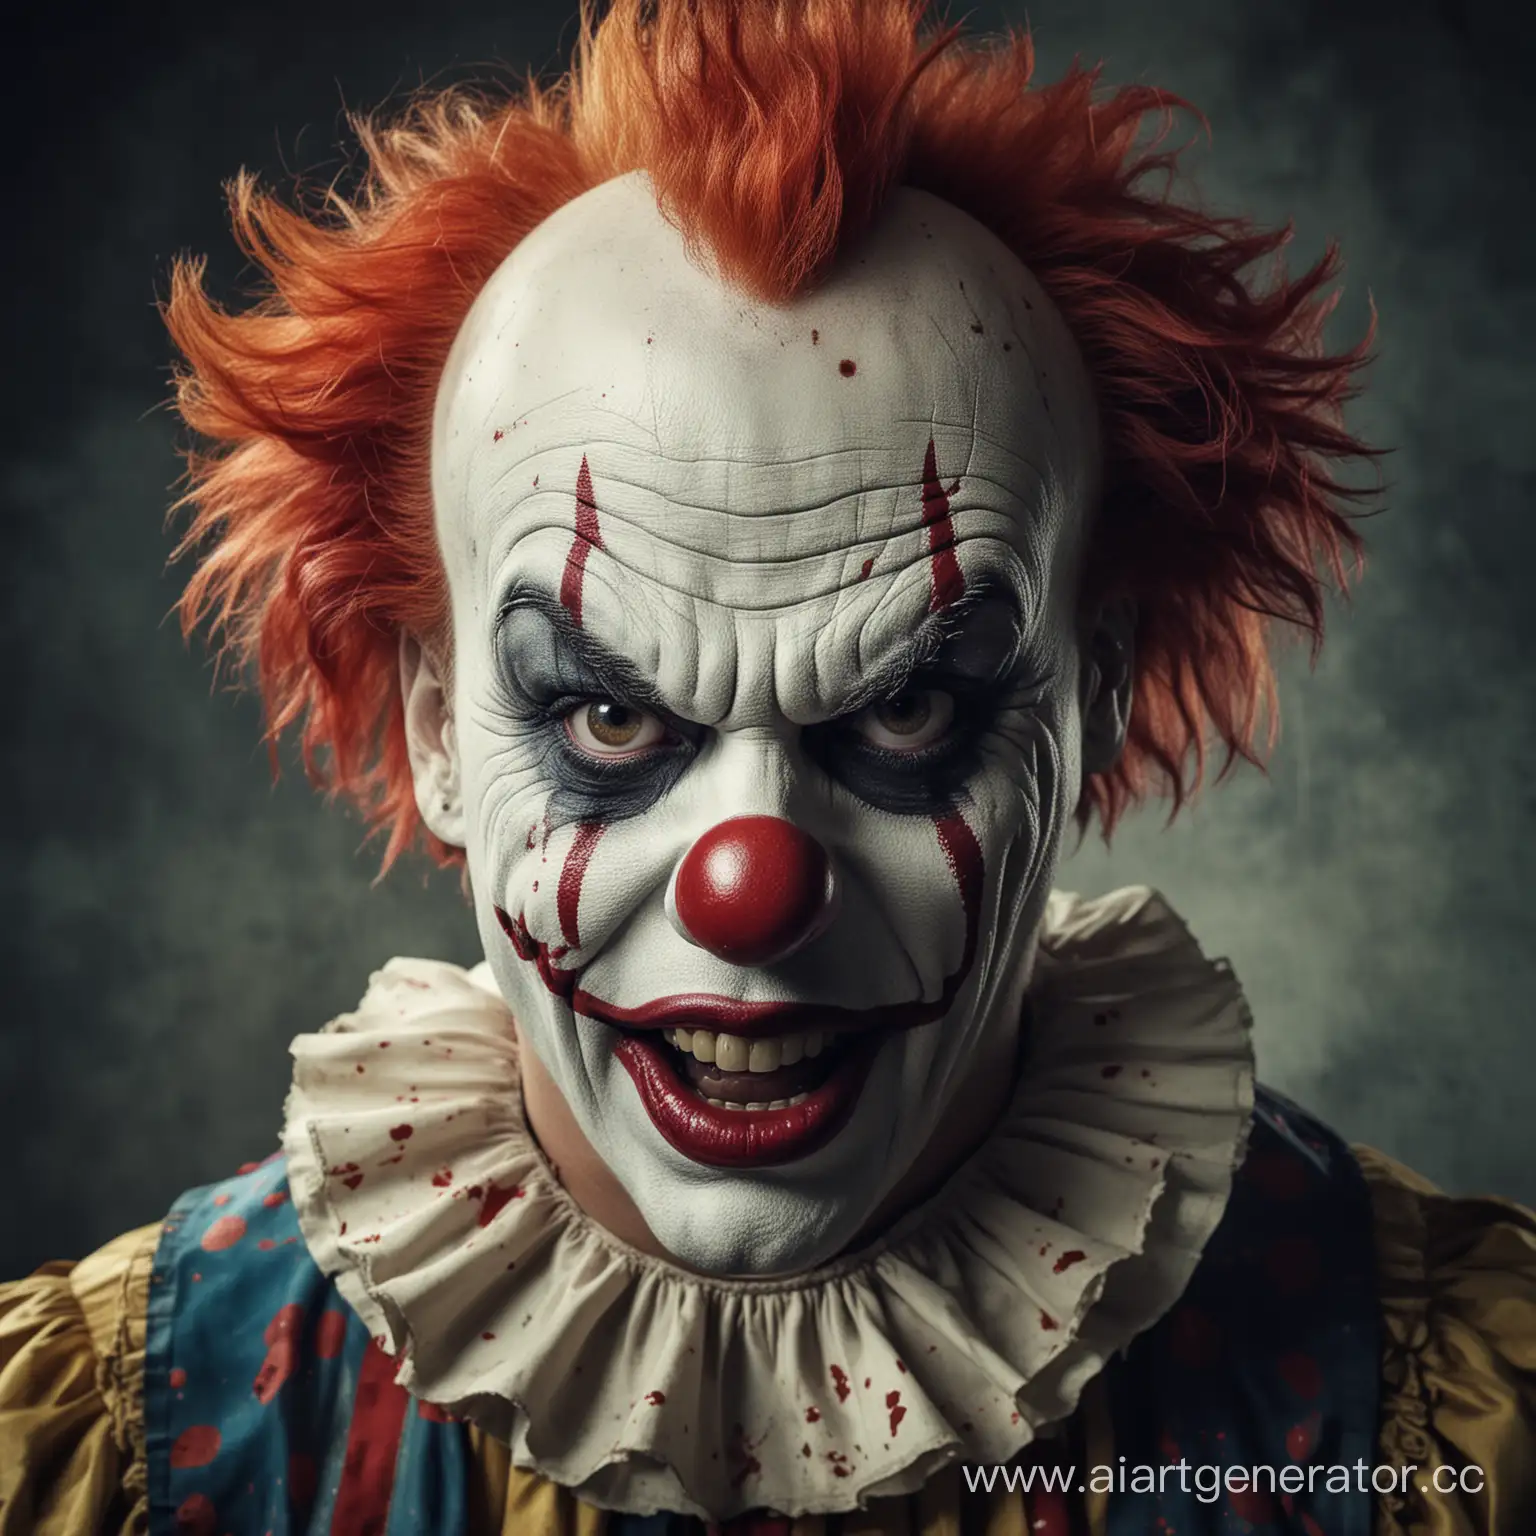 Menacing-Clown-with-Terrifying-Grin-and-Bloodthirsty-Ambiance